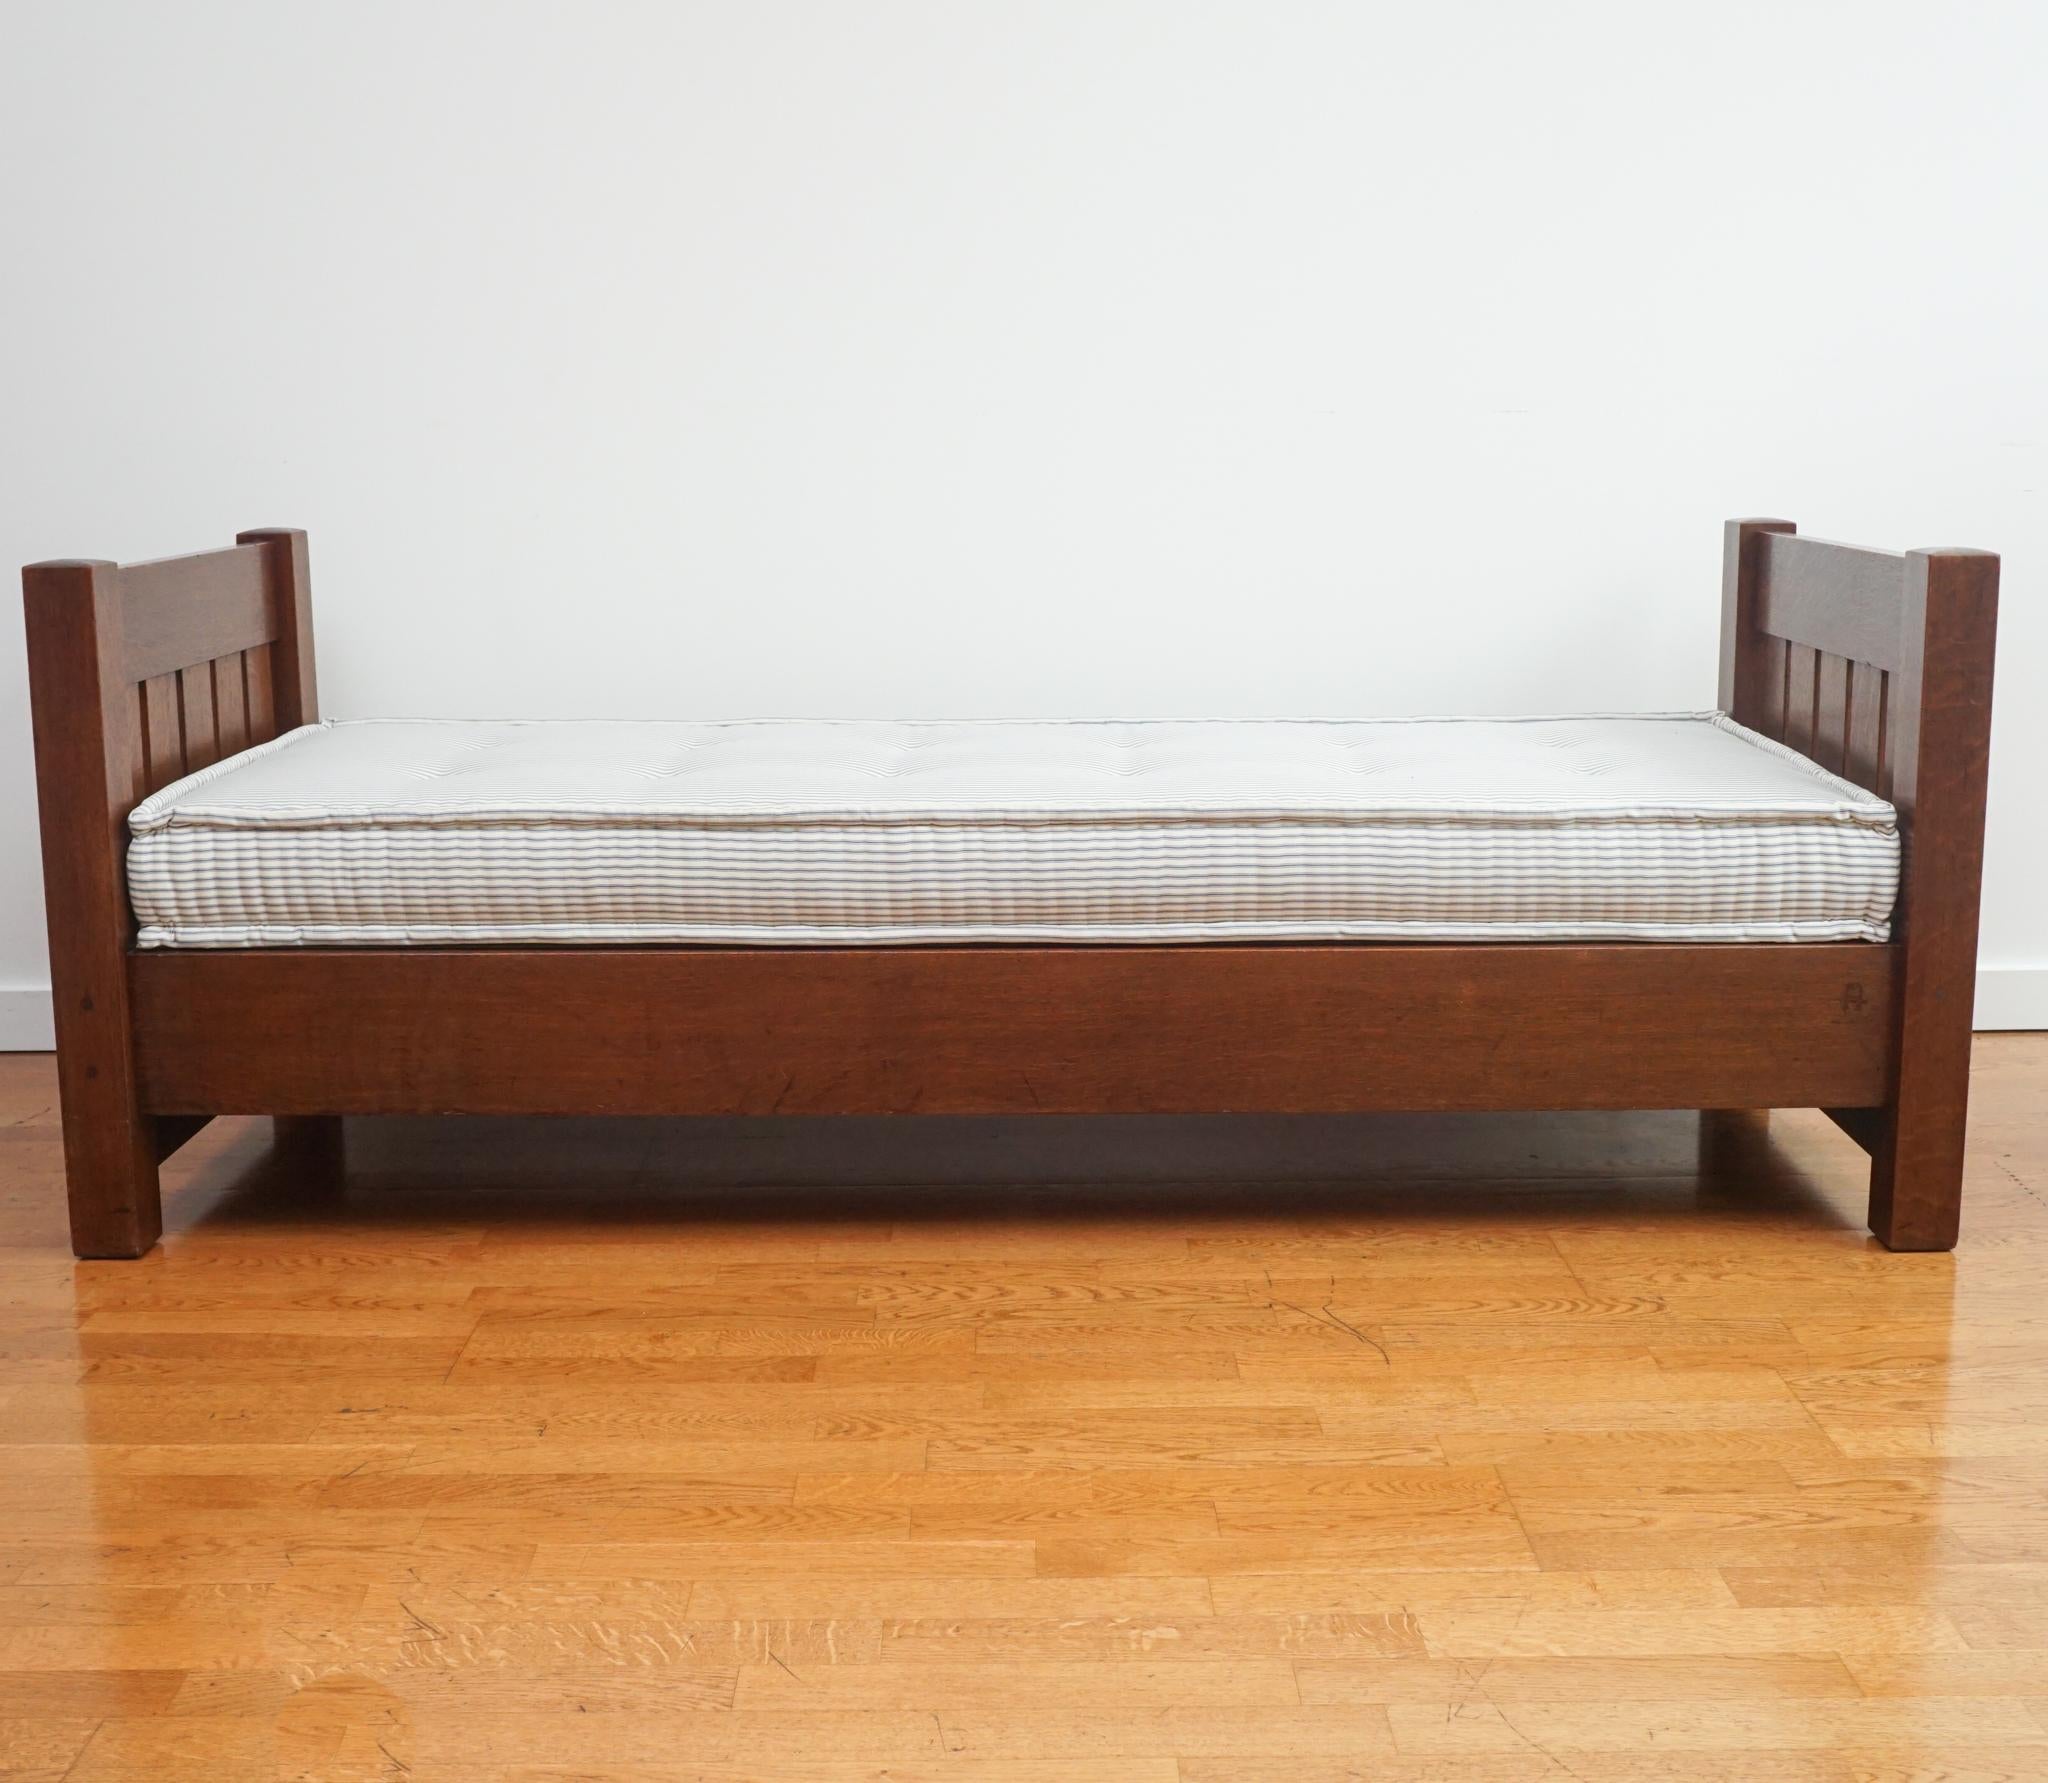 The Mission daybed, shown here, is a classic for all time. Made of solid oak, the finish has been gently restored, the support deck for the mattress replaced, and the button-tufted mattress custom made in ticking stripe with traditional French welt.